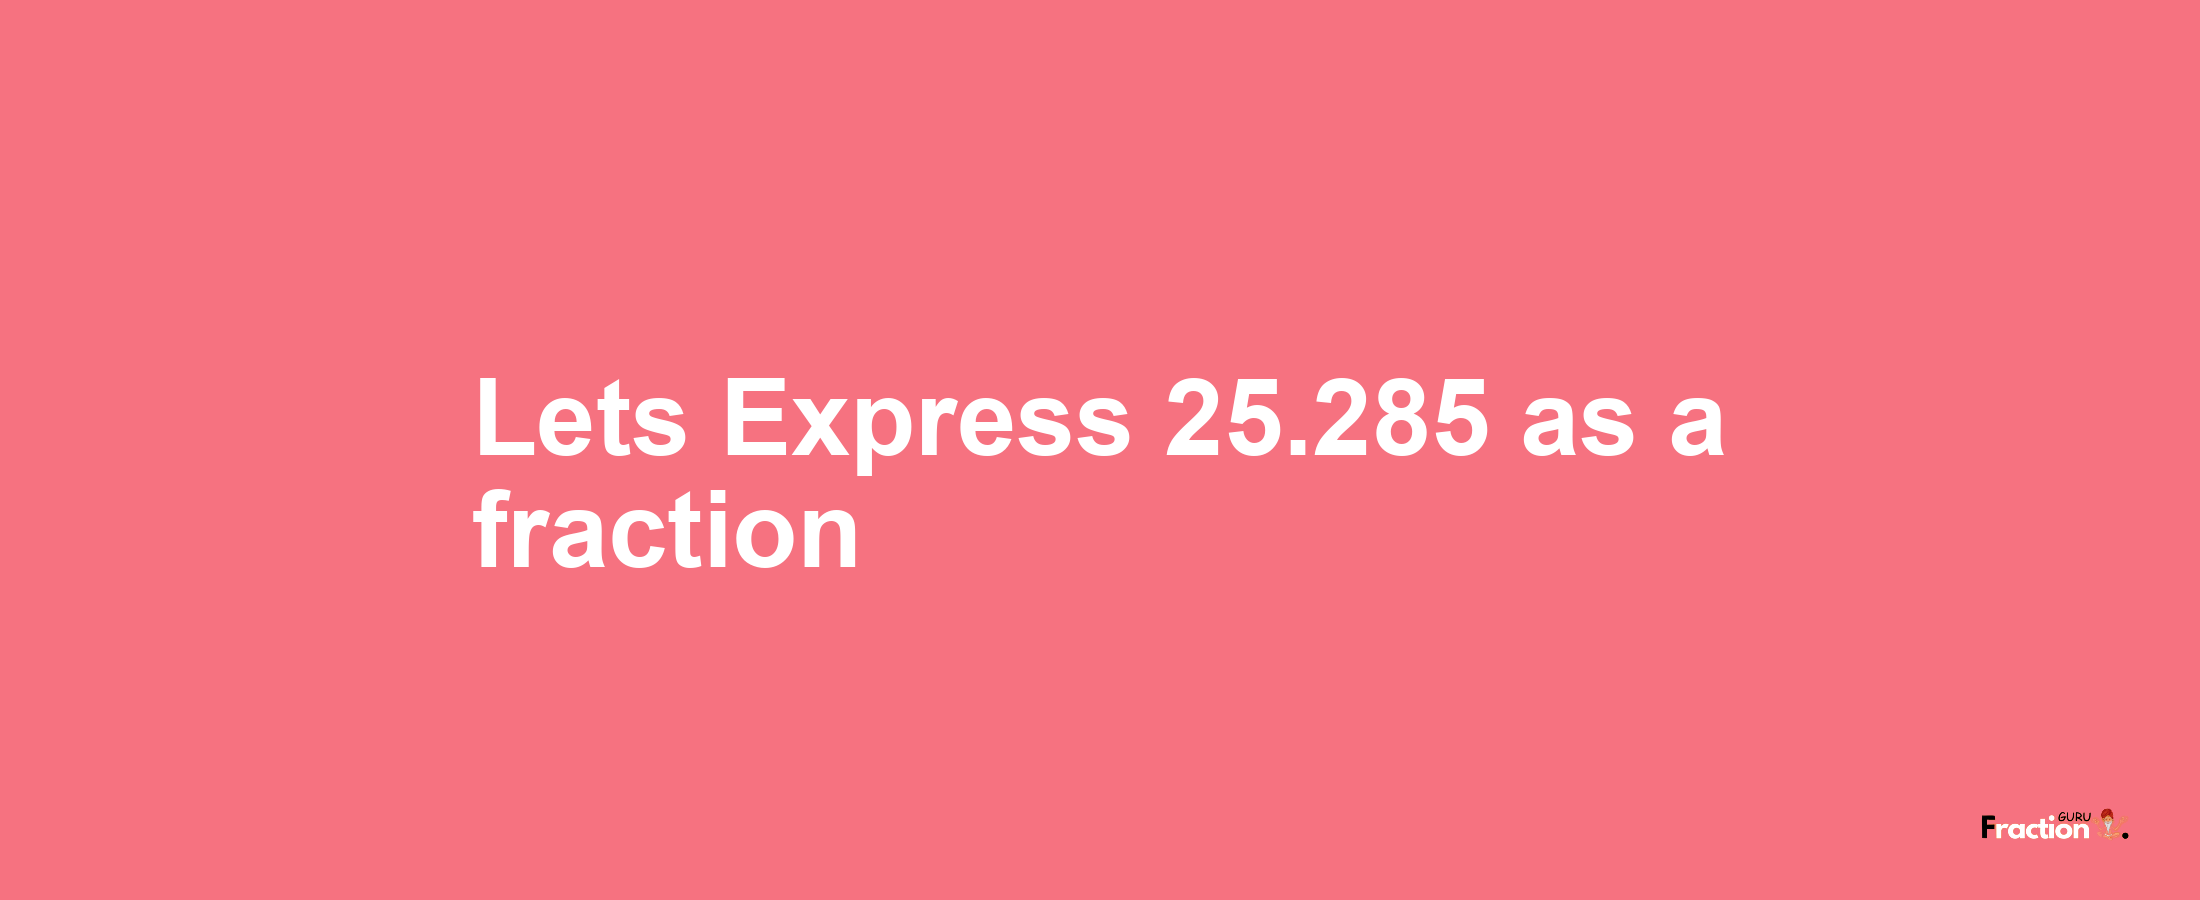 Lets Express 25.285 as afraction